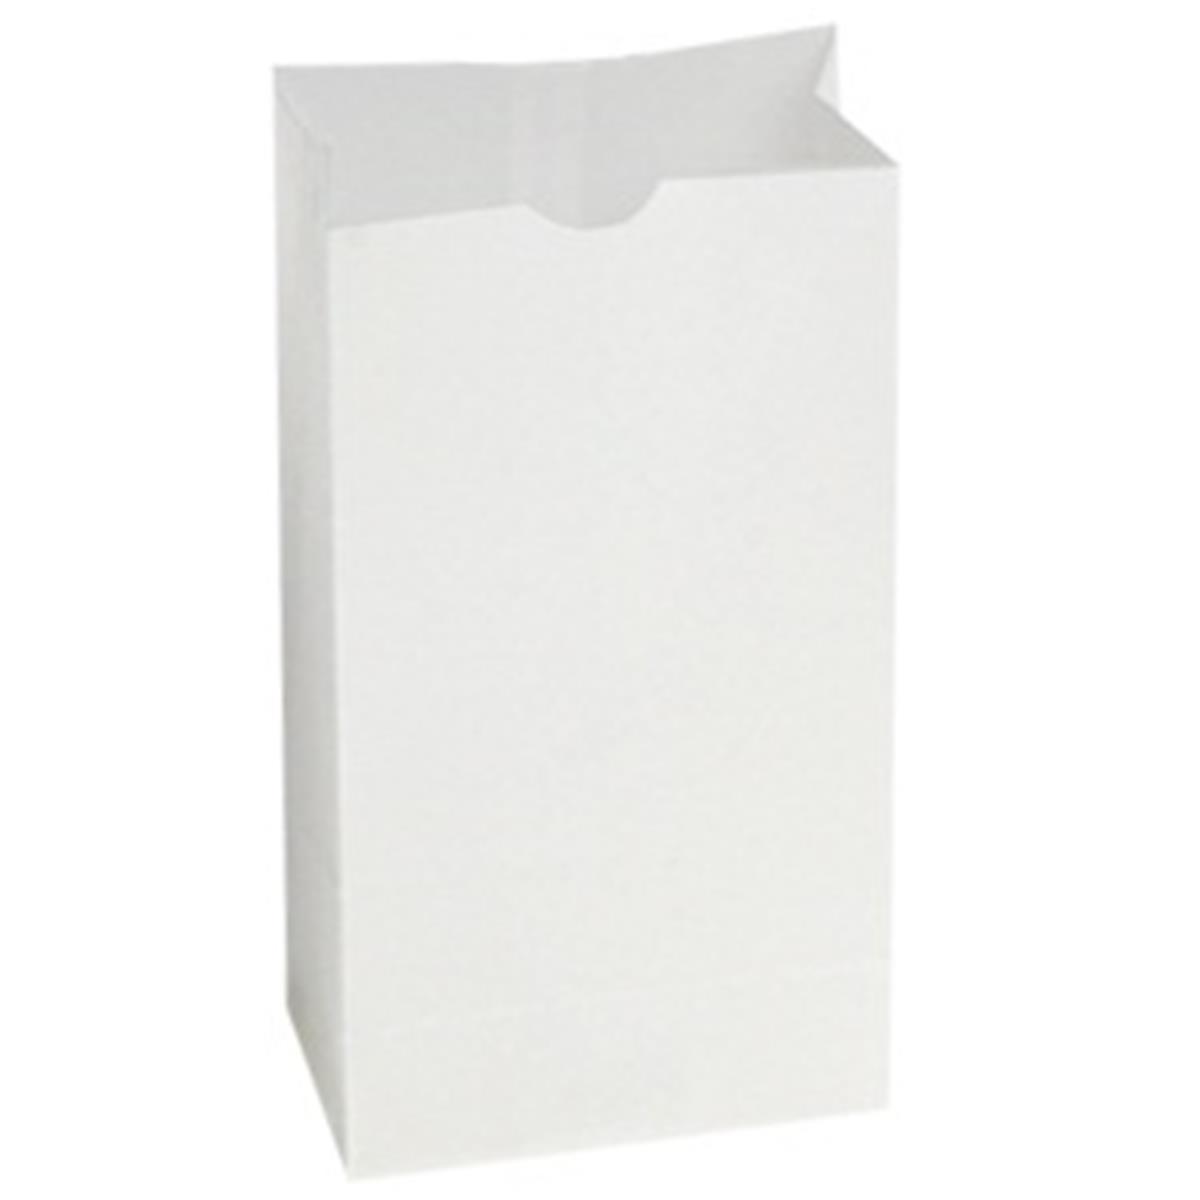 300296 Cpc 6 Lbs Wax Grocery Bags, White - Case Of 1000